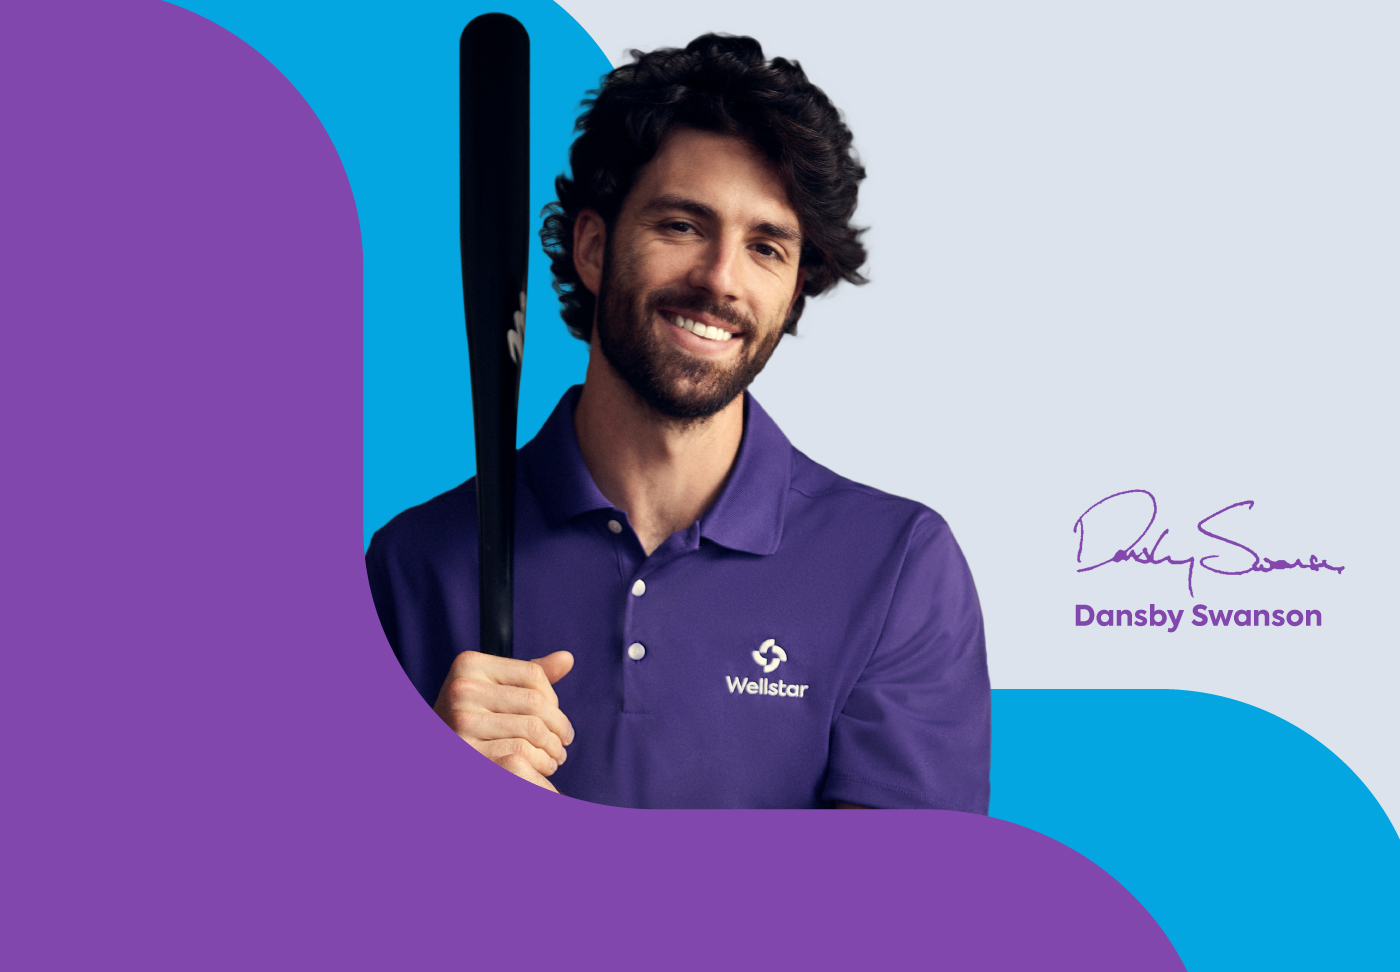 Dansby Swanson to speak to Cobb Chamber on Feb. 14